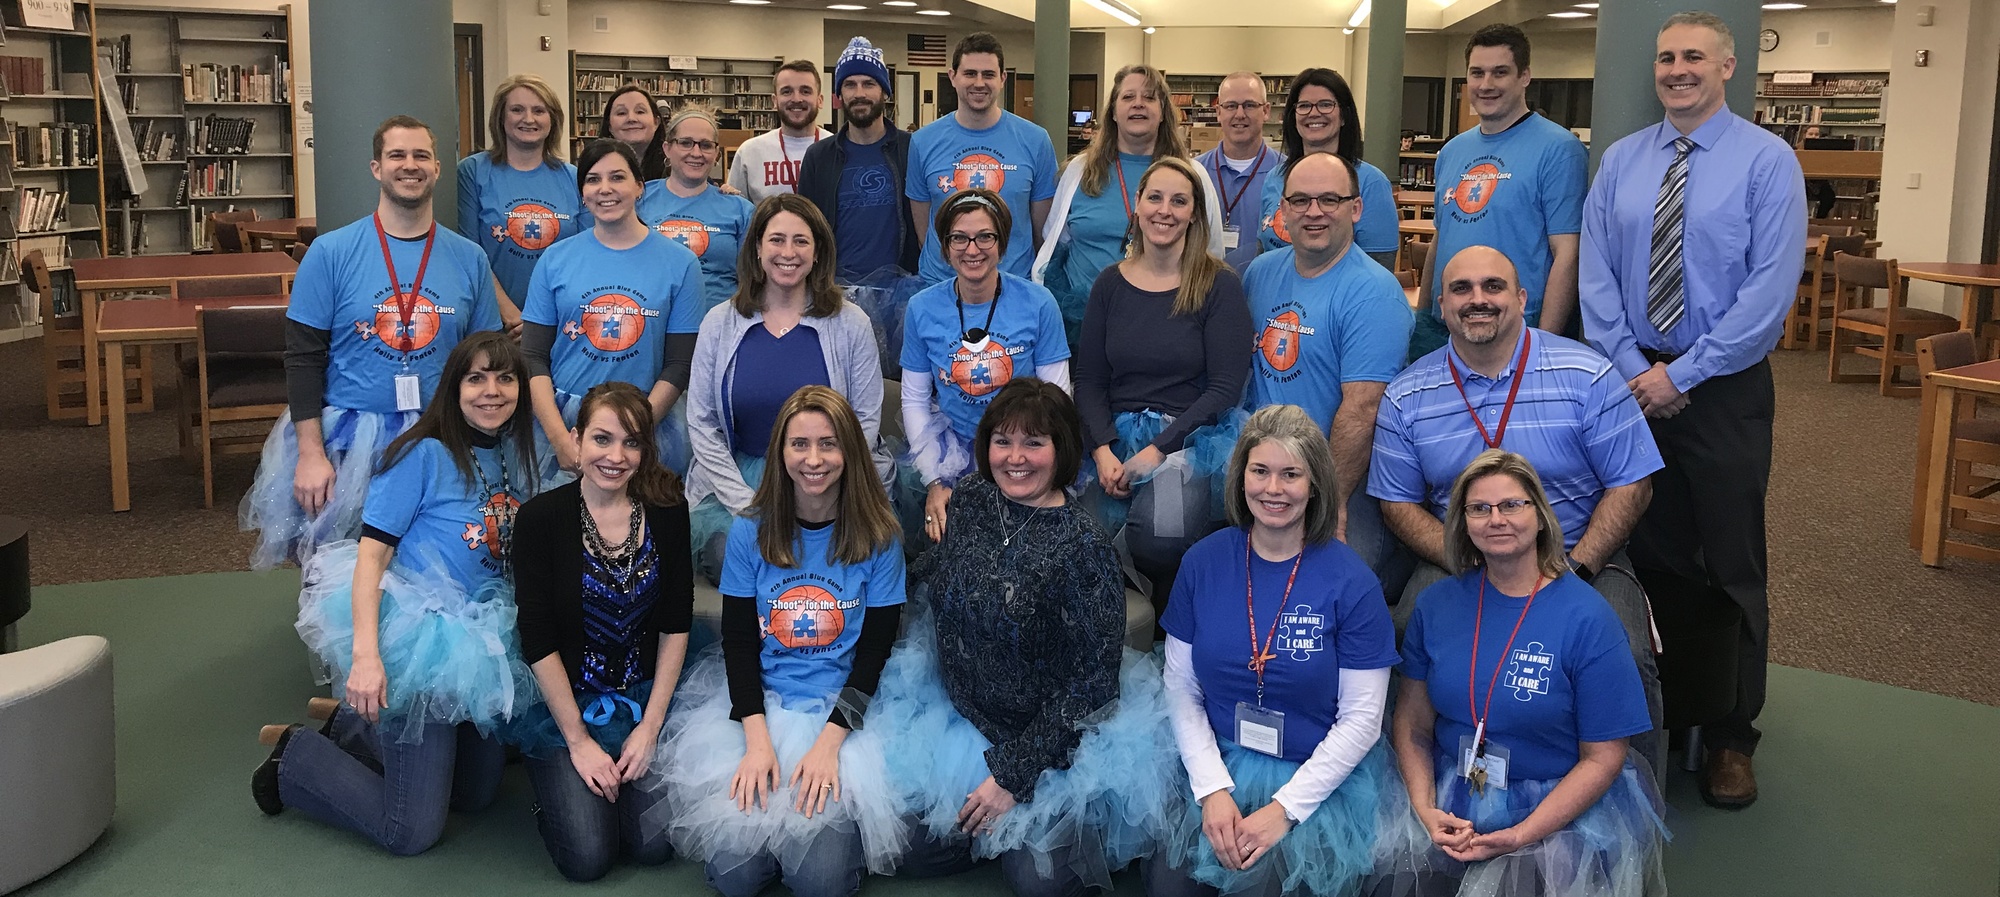 HHS staff supporting Autism Awareness wearing their blue shirts and blue tutus